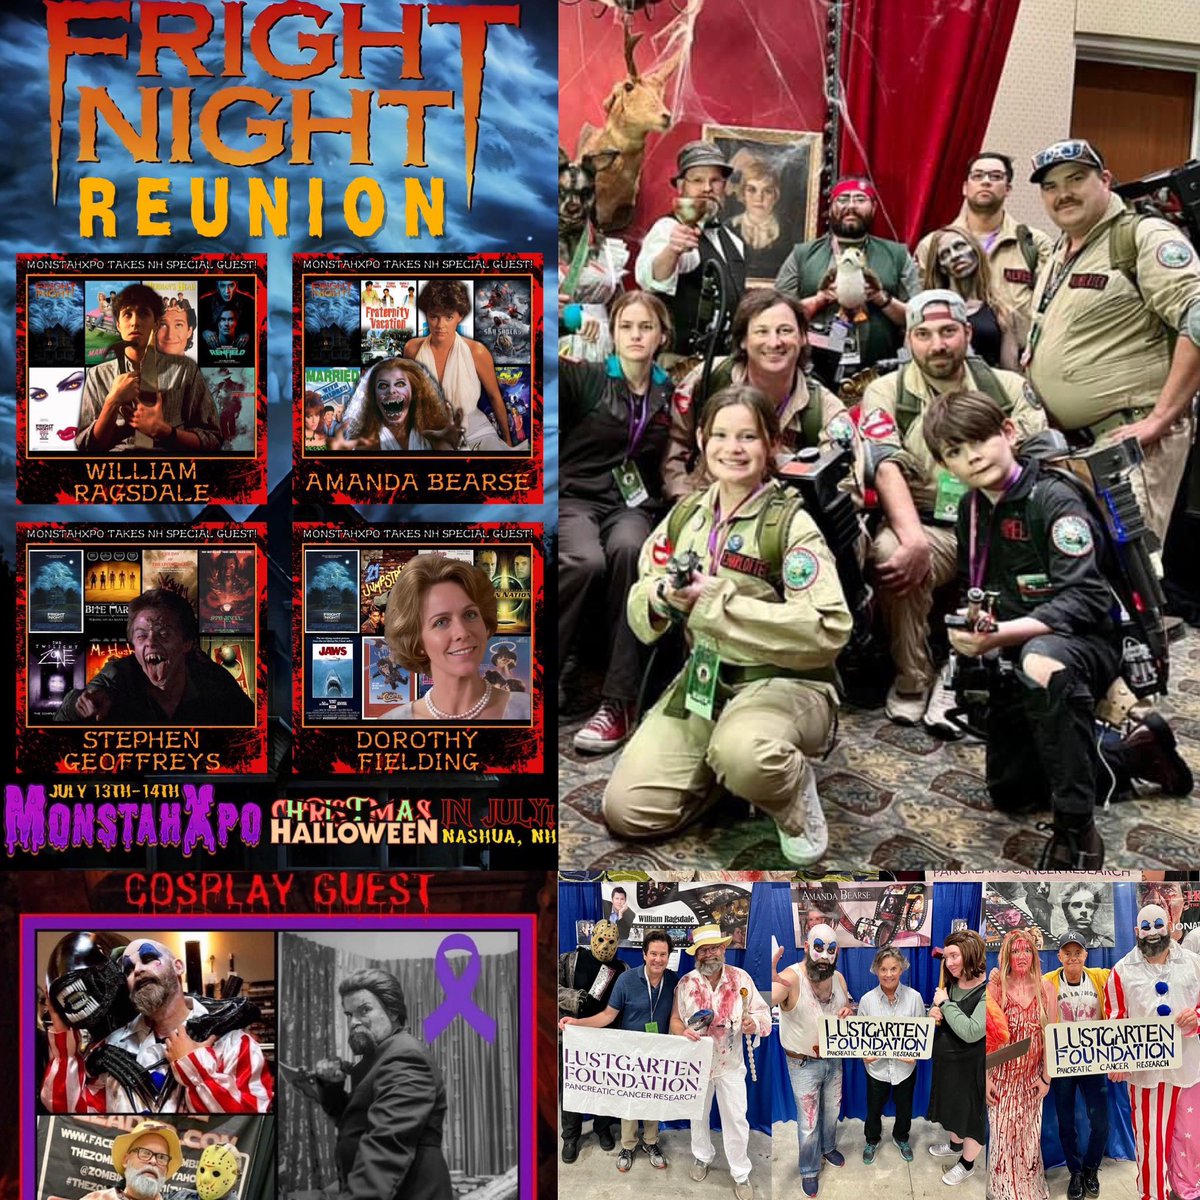 On 7/13-7/14, we’re fundraising for @lustgartenfdn at the inaugural @monstahxpo  in Nashua, NH.  After you visit talent such as Fright Night’s @MrsBearse, William Ragsdale, @sgeofreys & D. Fielding, please swing, photo op, & donate.💜 @FANGORIA @iHorrorNews @ScreamHorrorMag #nh